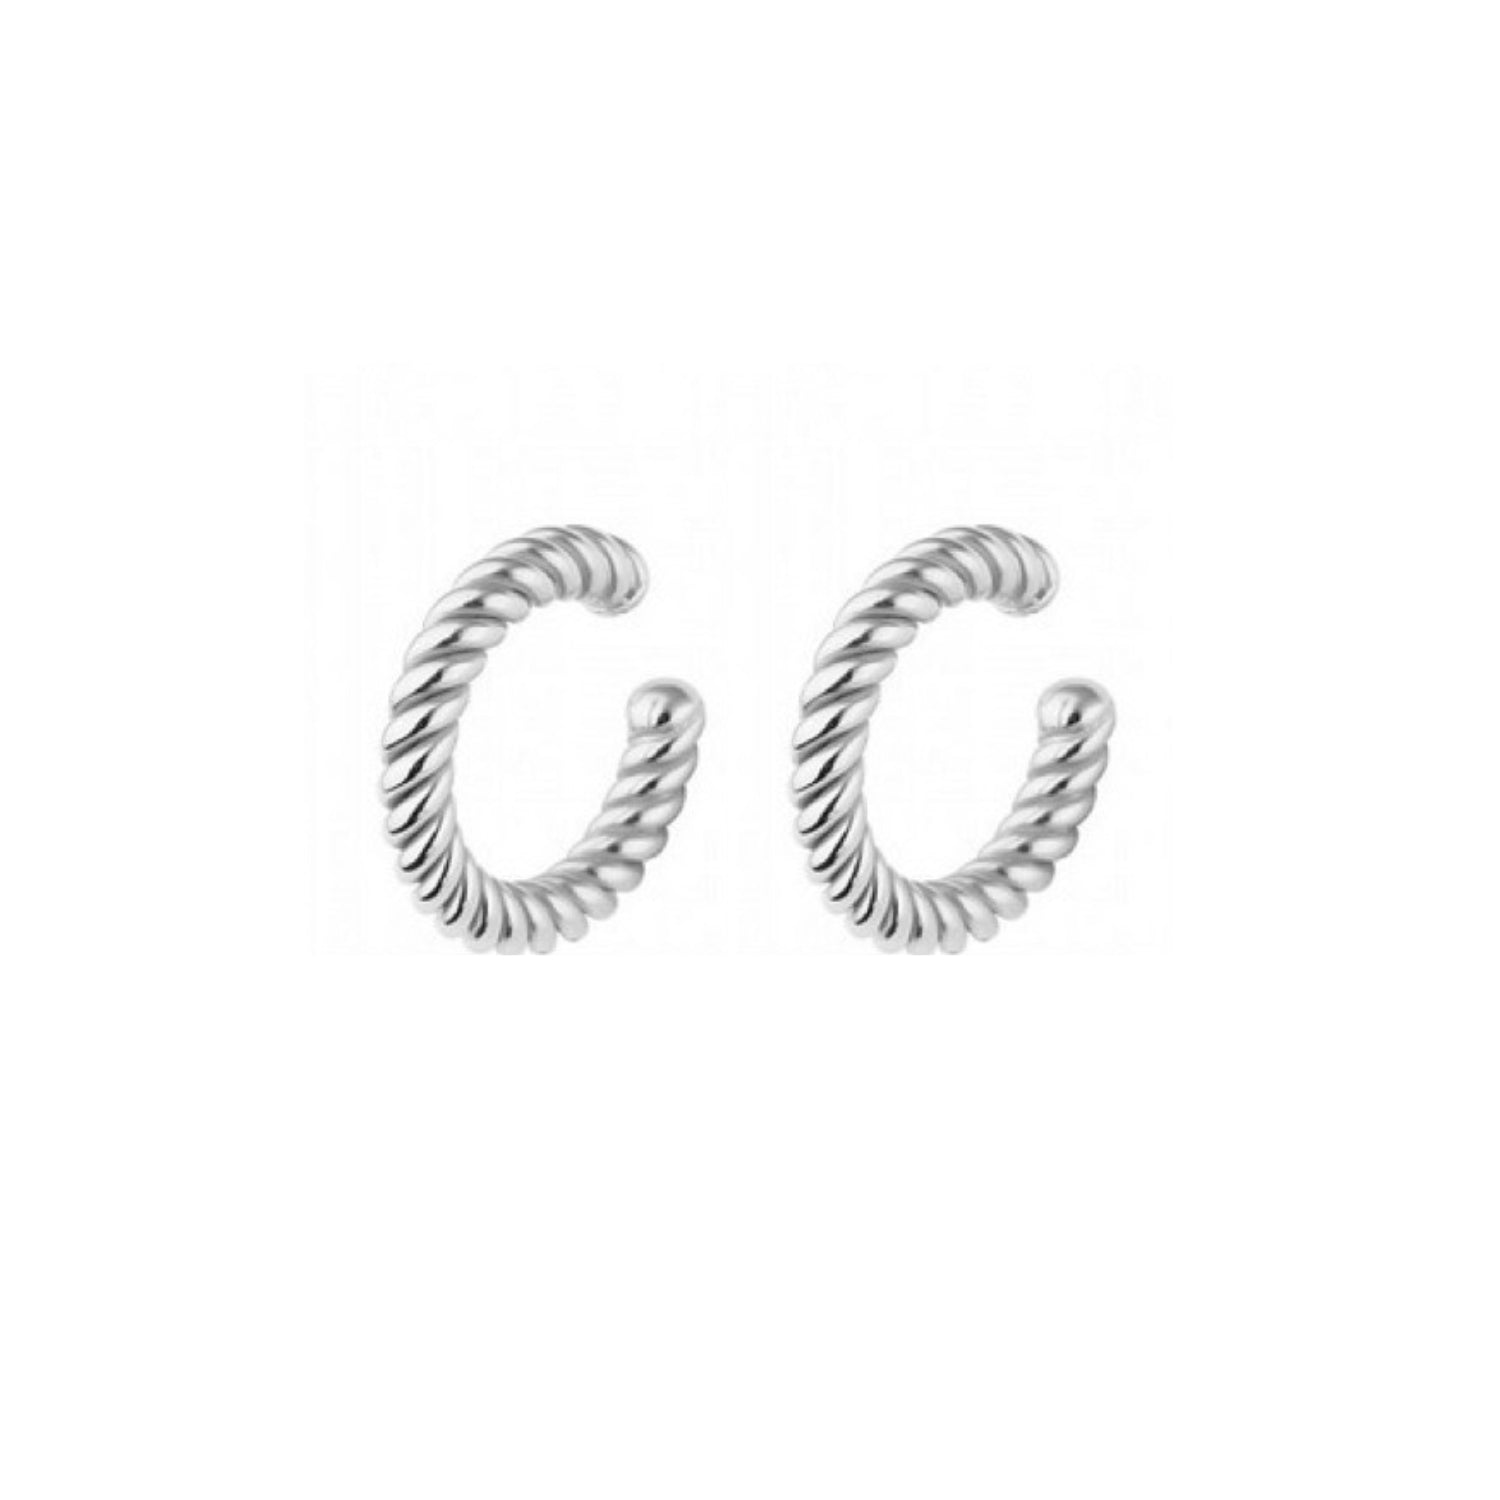 Twisted Sterling Silver Ear Cuff No Piercing - Pair